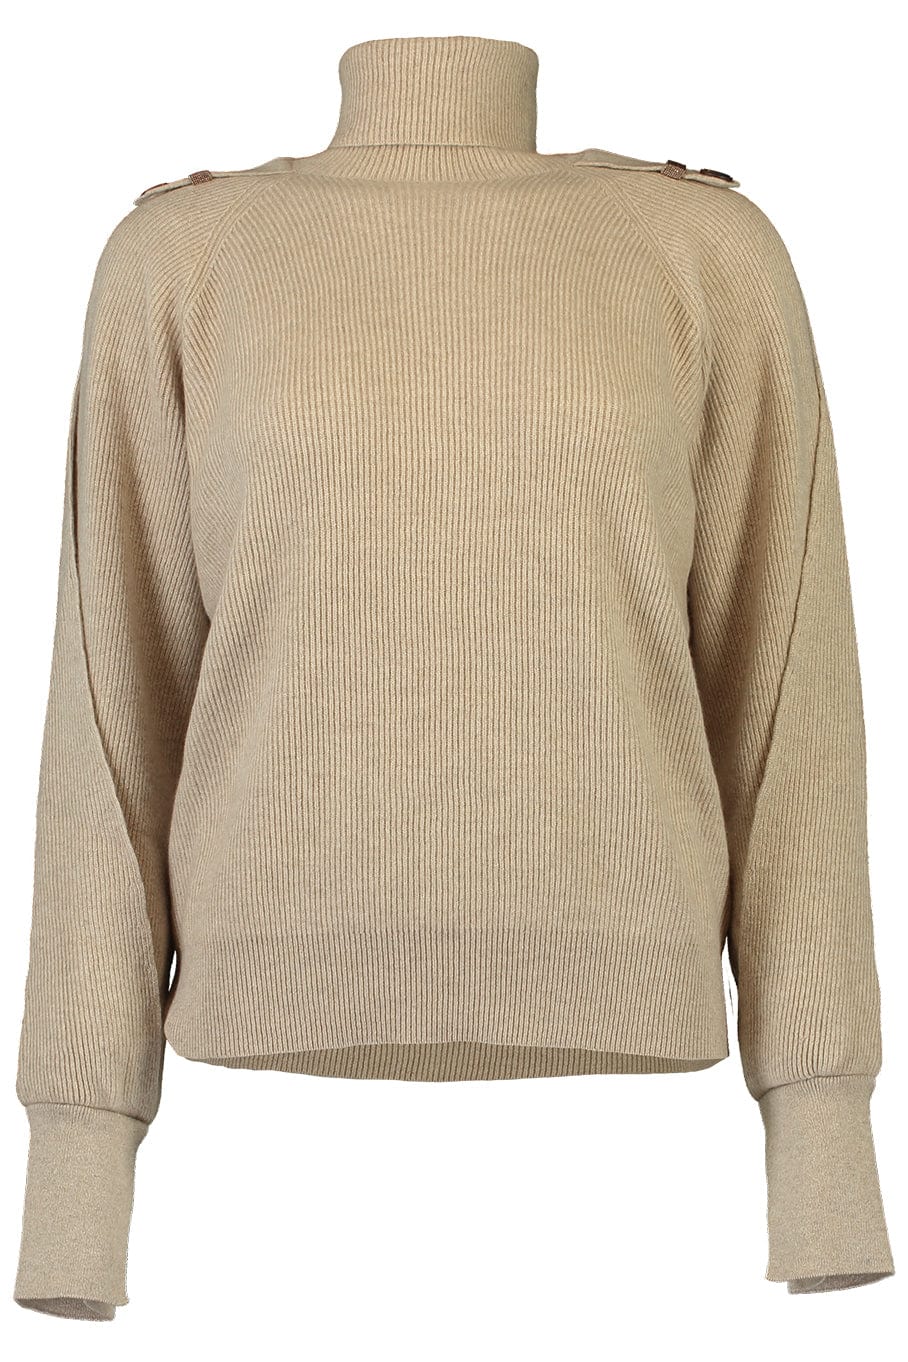 BRUNELLO CUCINELLI CLOTHINGTOPSWEATER Turtle Neck With Open Sleeve Detail